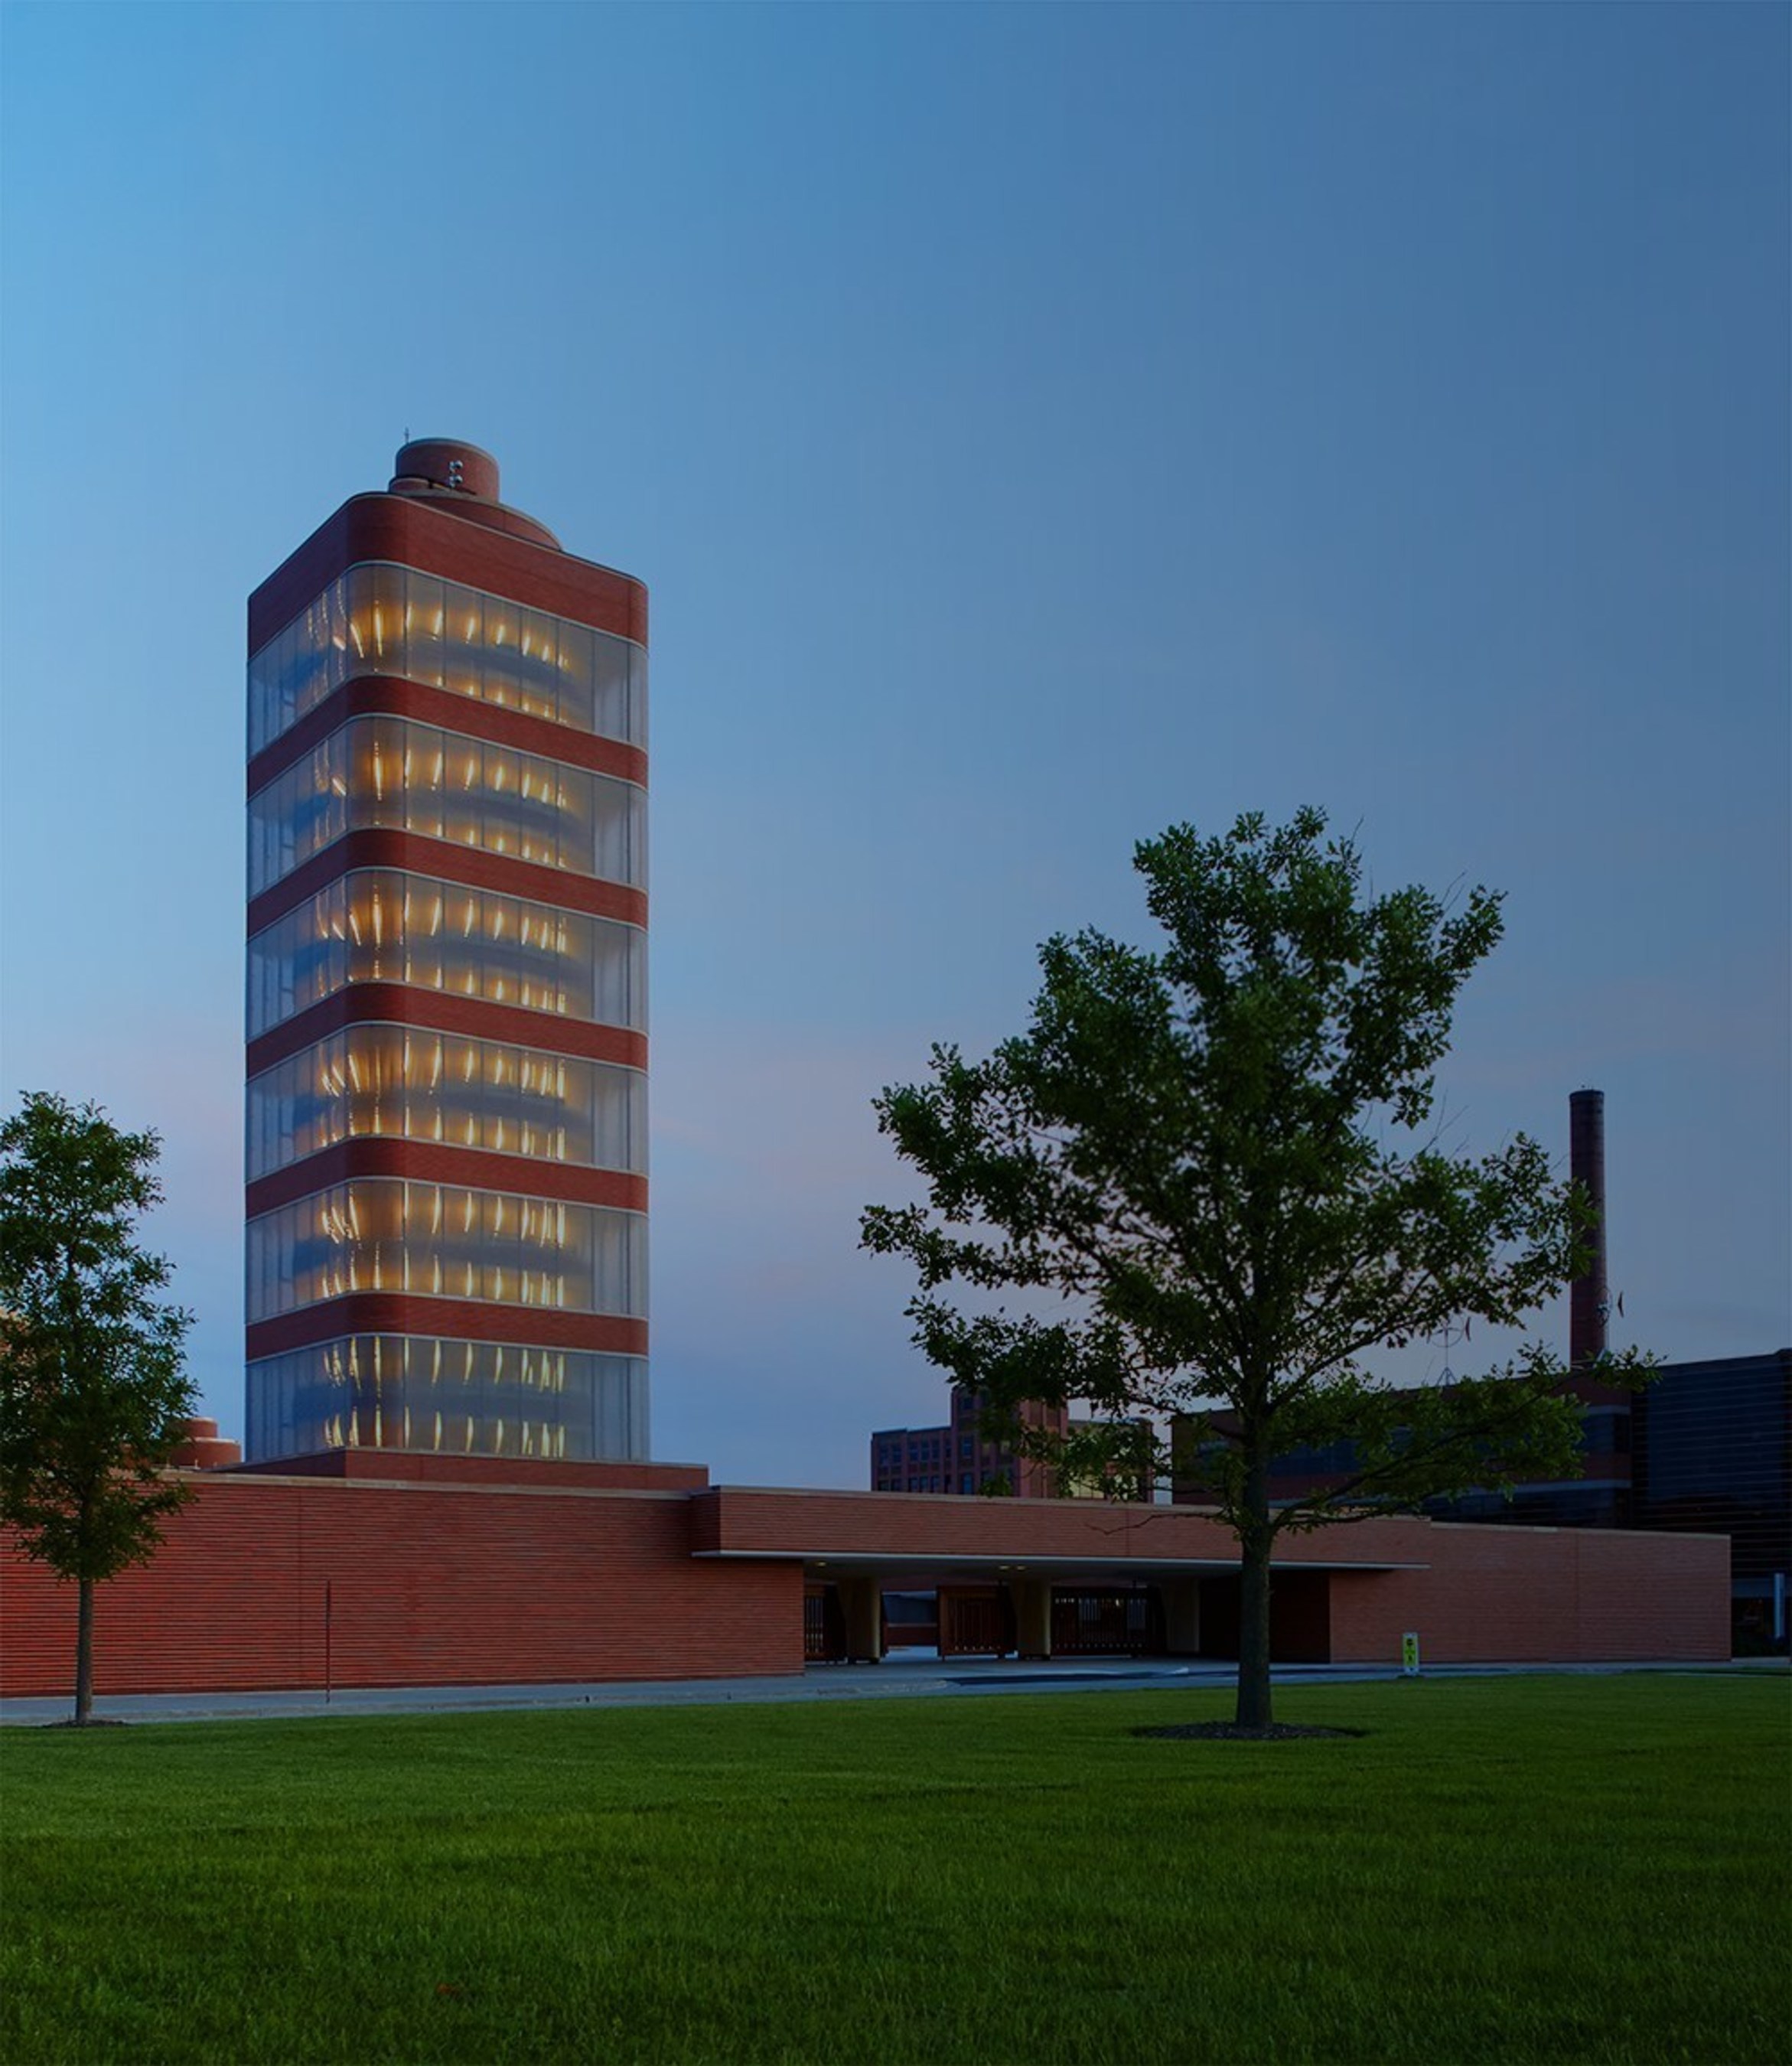 SC Johnson's research tower in Racine, Wisconsin, designed by Frank Lloyd Wright